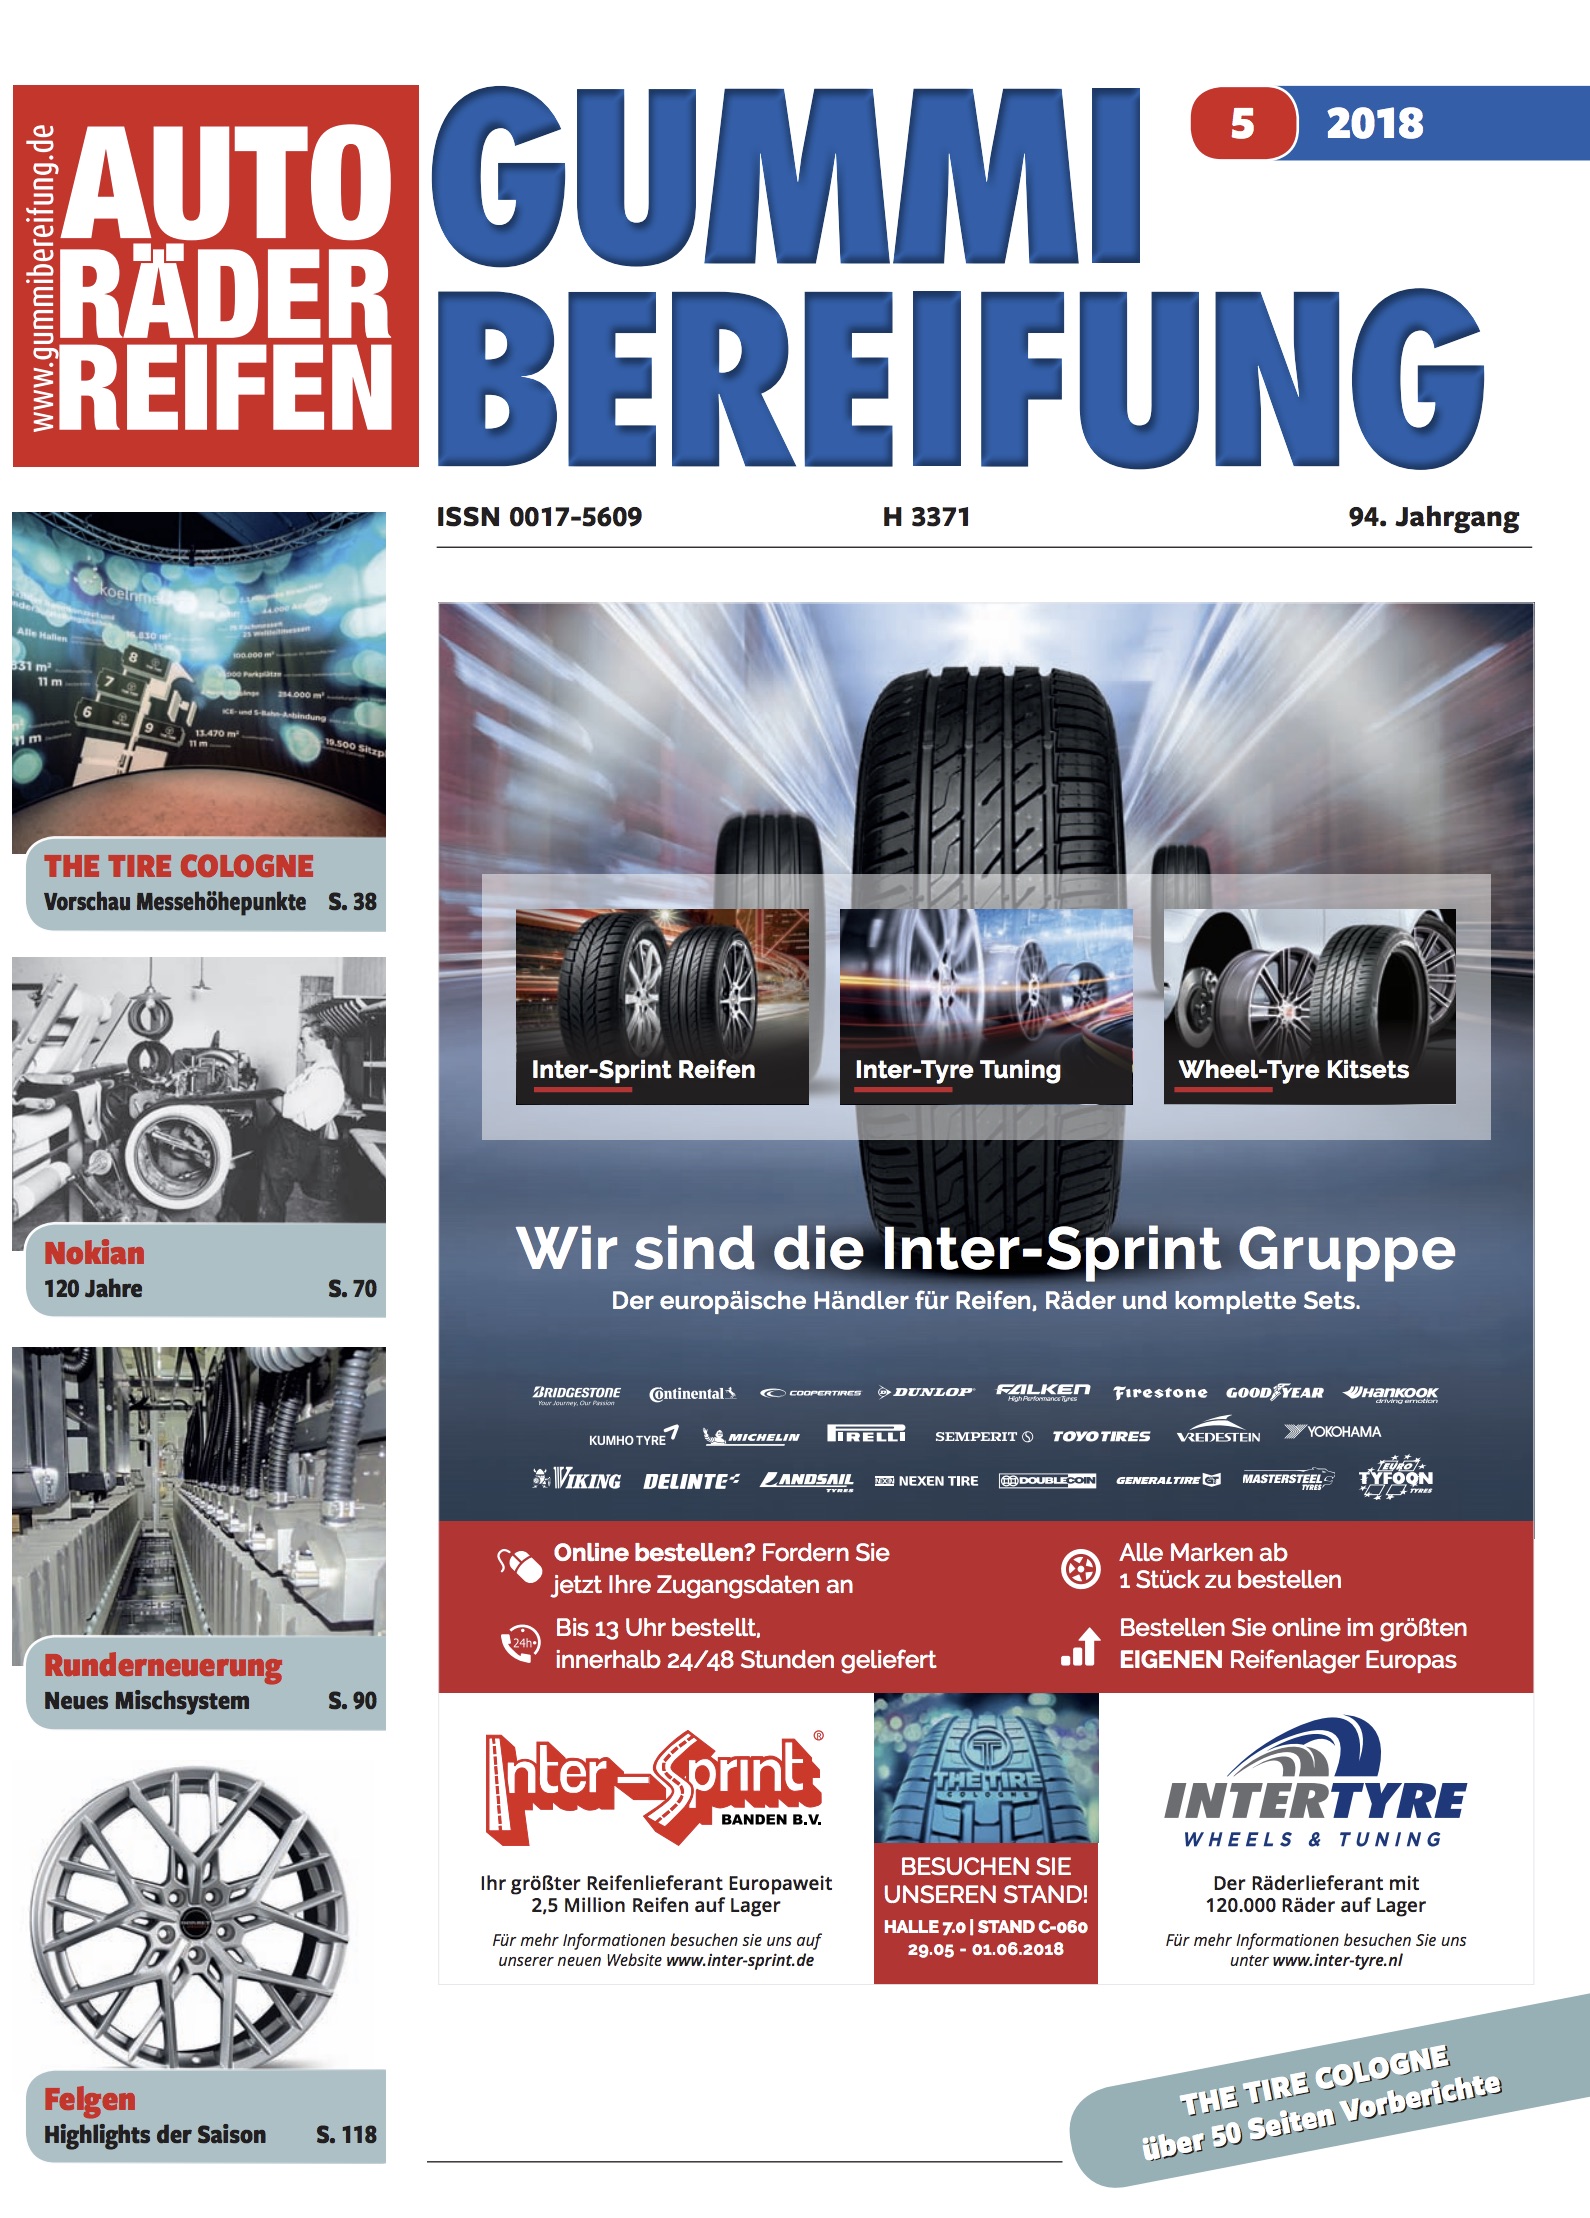 TyreSystem auf The Tire Cologne 2018